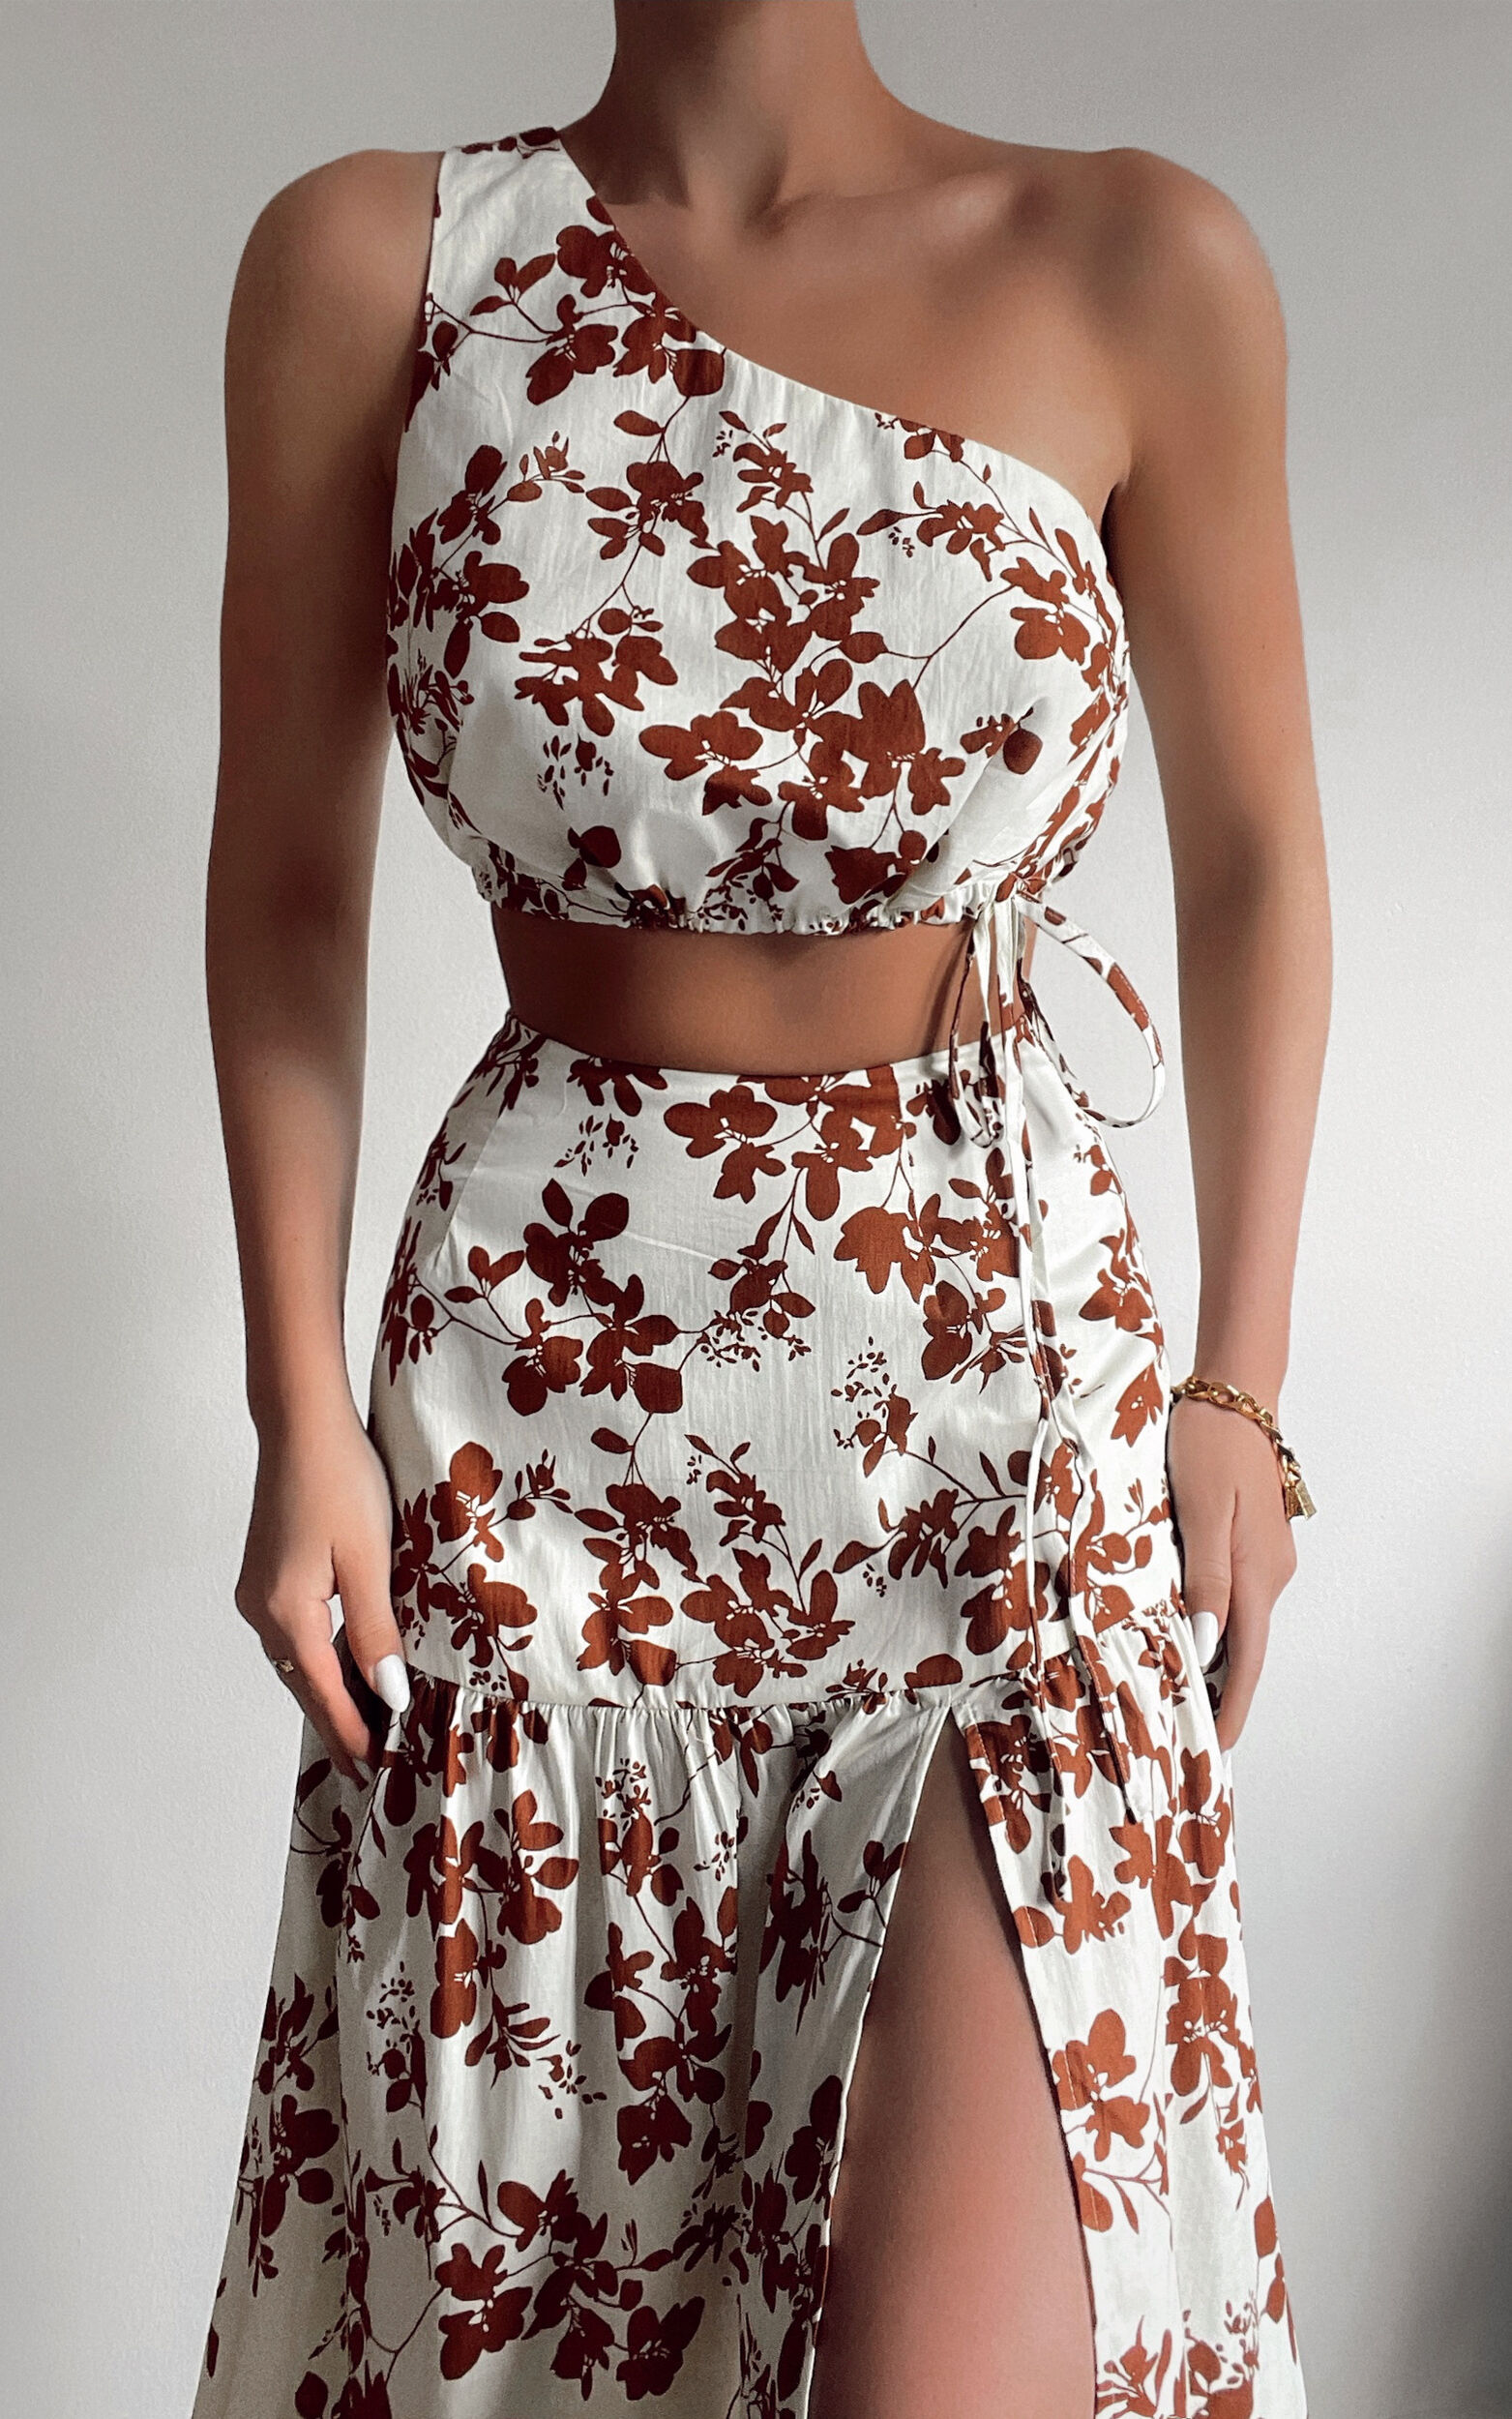 Meghan Two Piece Set - One Shoulder Crop Top and Midaxi Skirt Set in Shadow Floral - 04, BRN1